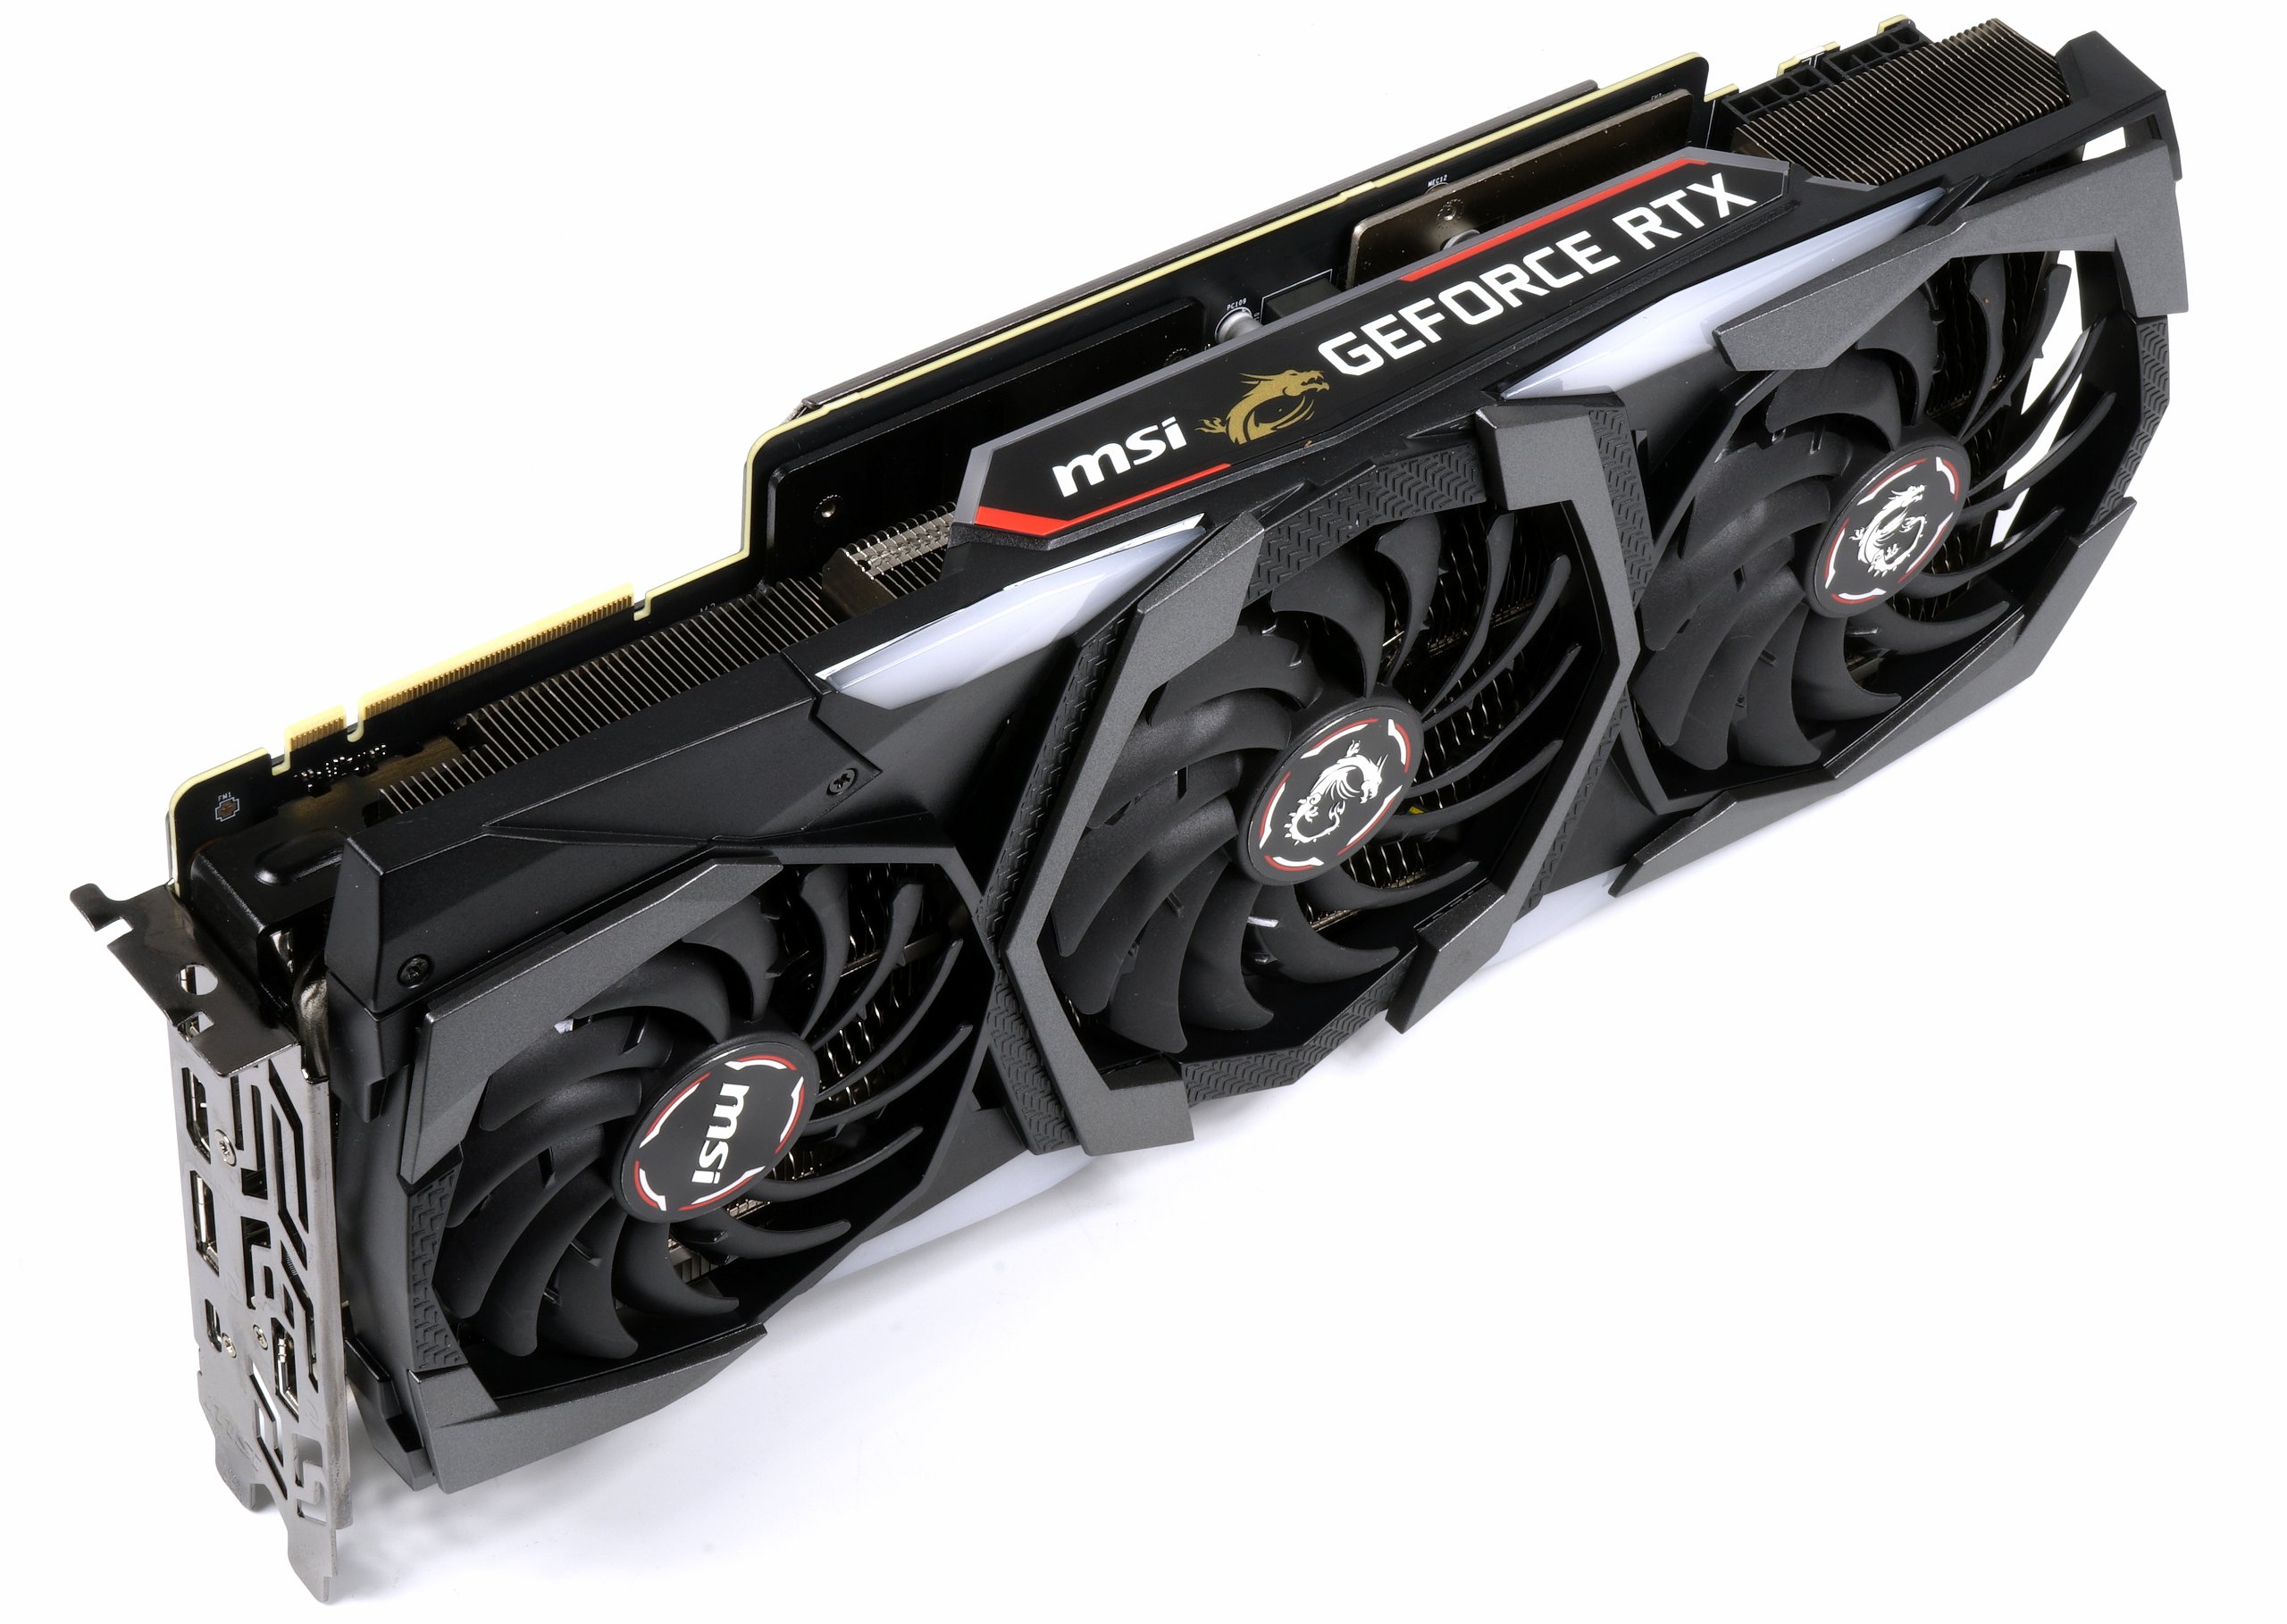 MSI GeForce RTX 2080 Ti Gaming X Trio Reviews, Pros and Cons